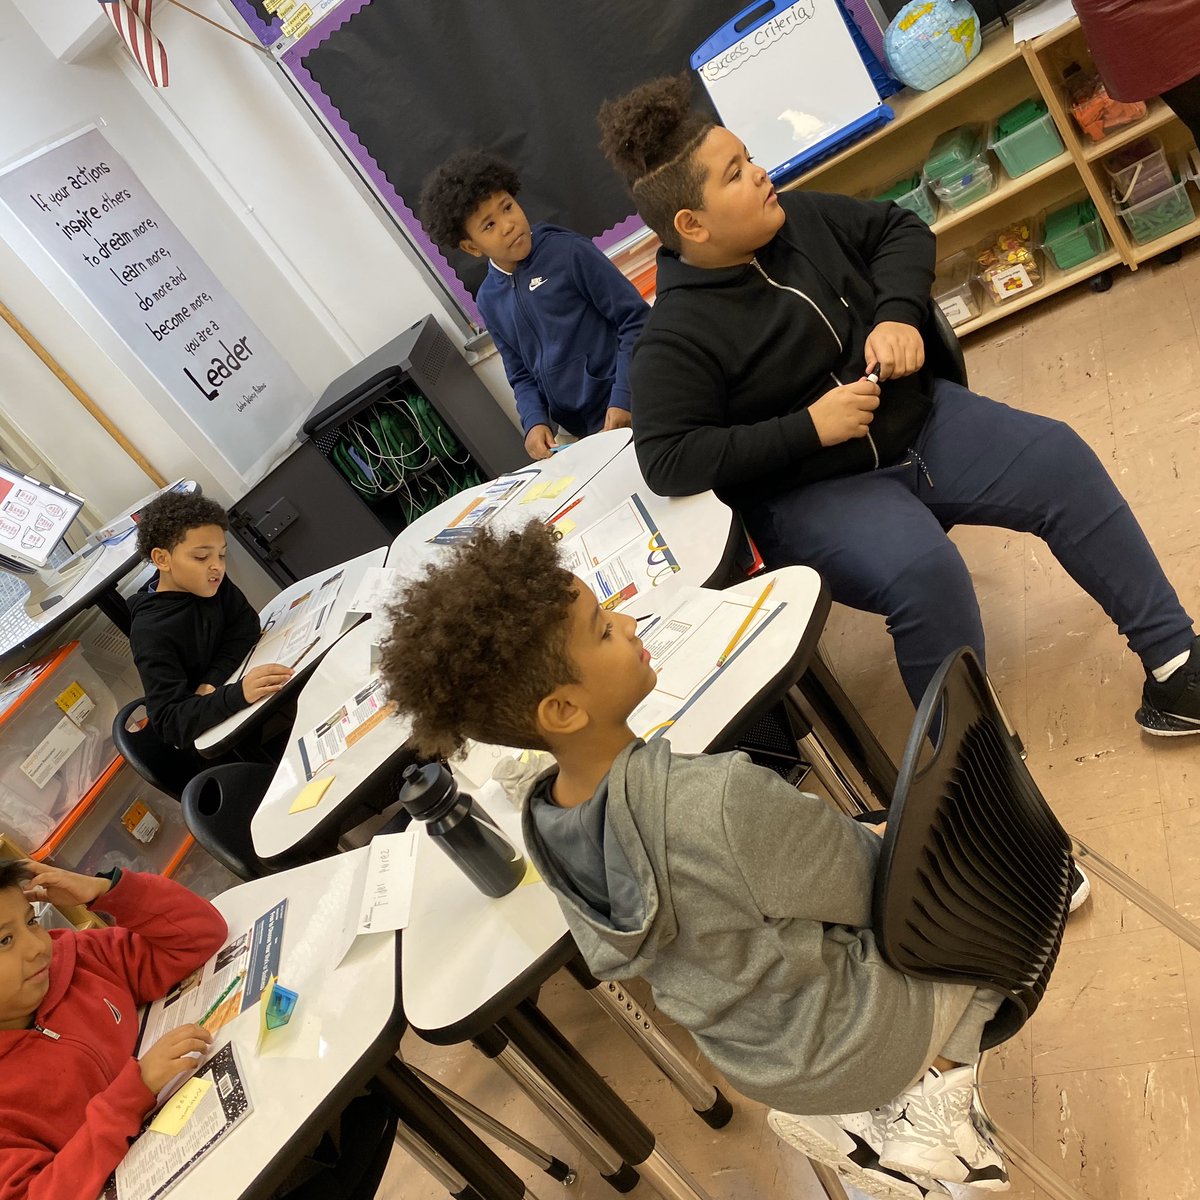 Our 5th graders learning about work, business and money, thanks to @JANewYork @ps1xhhp we work above and beyond to get our kids ready for the real world. #entrepreneurial #innovative #highgrowth #highdemandcareers #ps1xhhp @sharintirado1 @Perdoxfuturejp @NunezaNYC @Csd7Bx